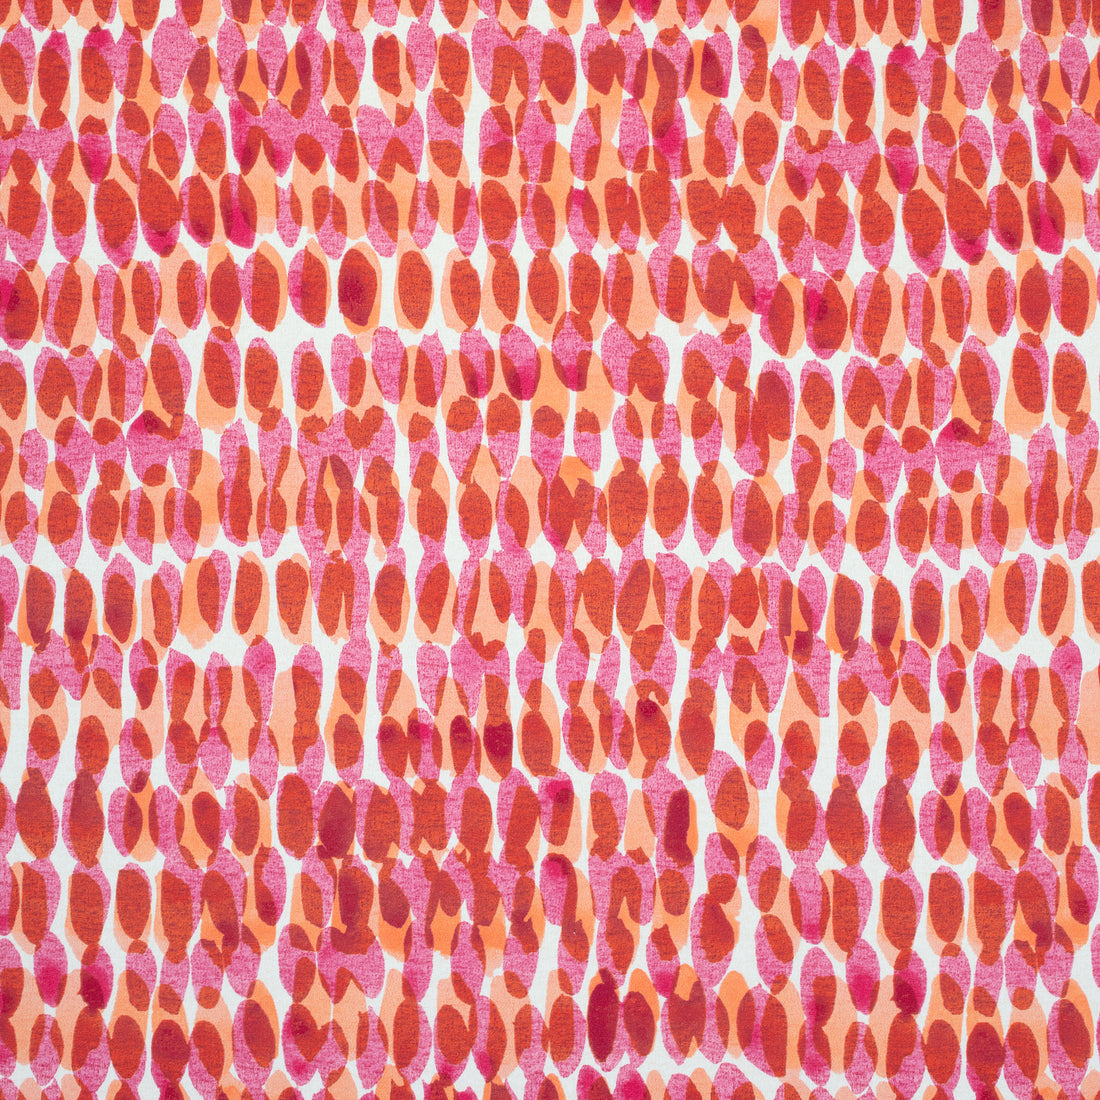 Rain Water fabric in pink and coral color - pattern number F910095 - by Thibaut in the Tropics collection